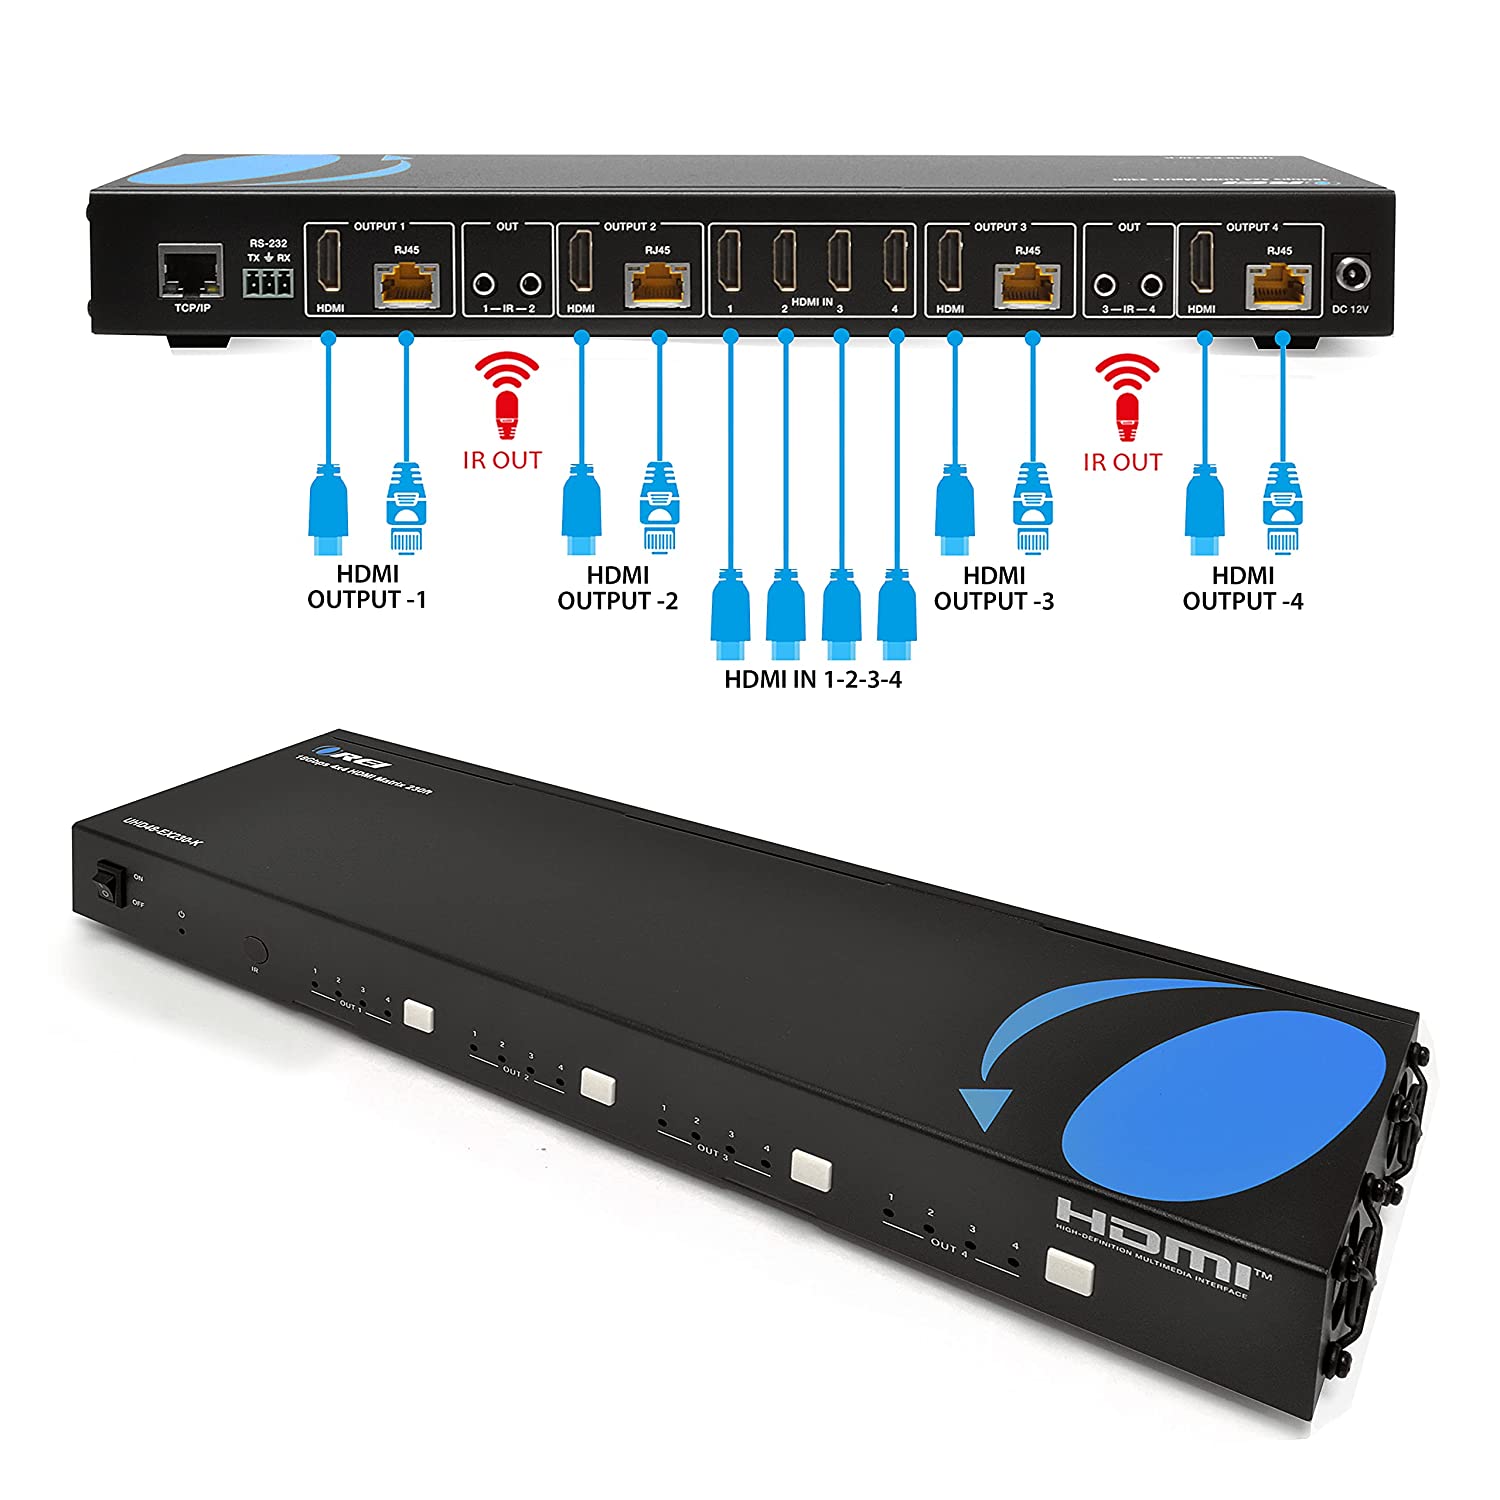 OREI UHD48-EX230-K 4K 4x4 HDMI Extender Matrix Over Single CAT5e/6/7 Cable with HDR Switcher & IR Control, RS-232 - Up to 230 Ft - 1080P Downscale - 4 x Loop Out - 4 Receivers Included - image 2 of 3